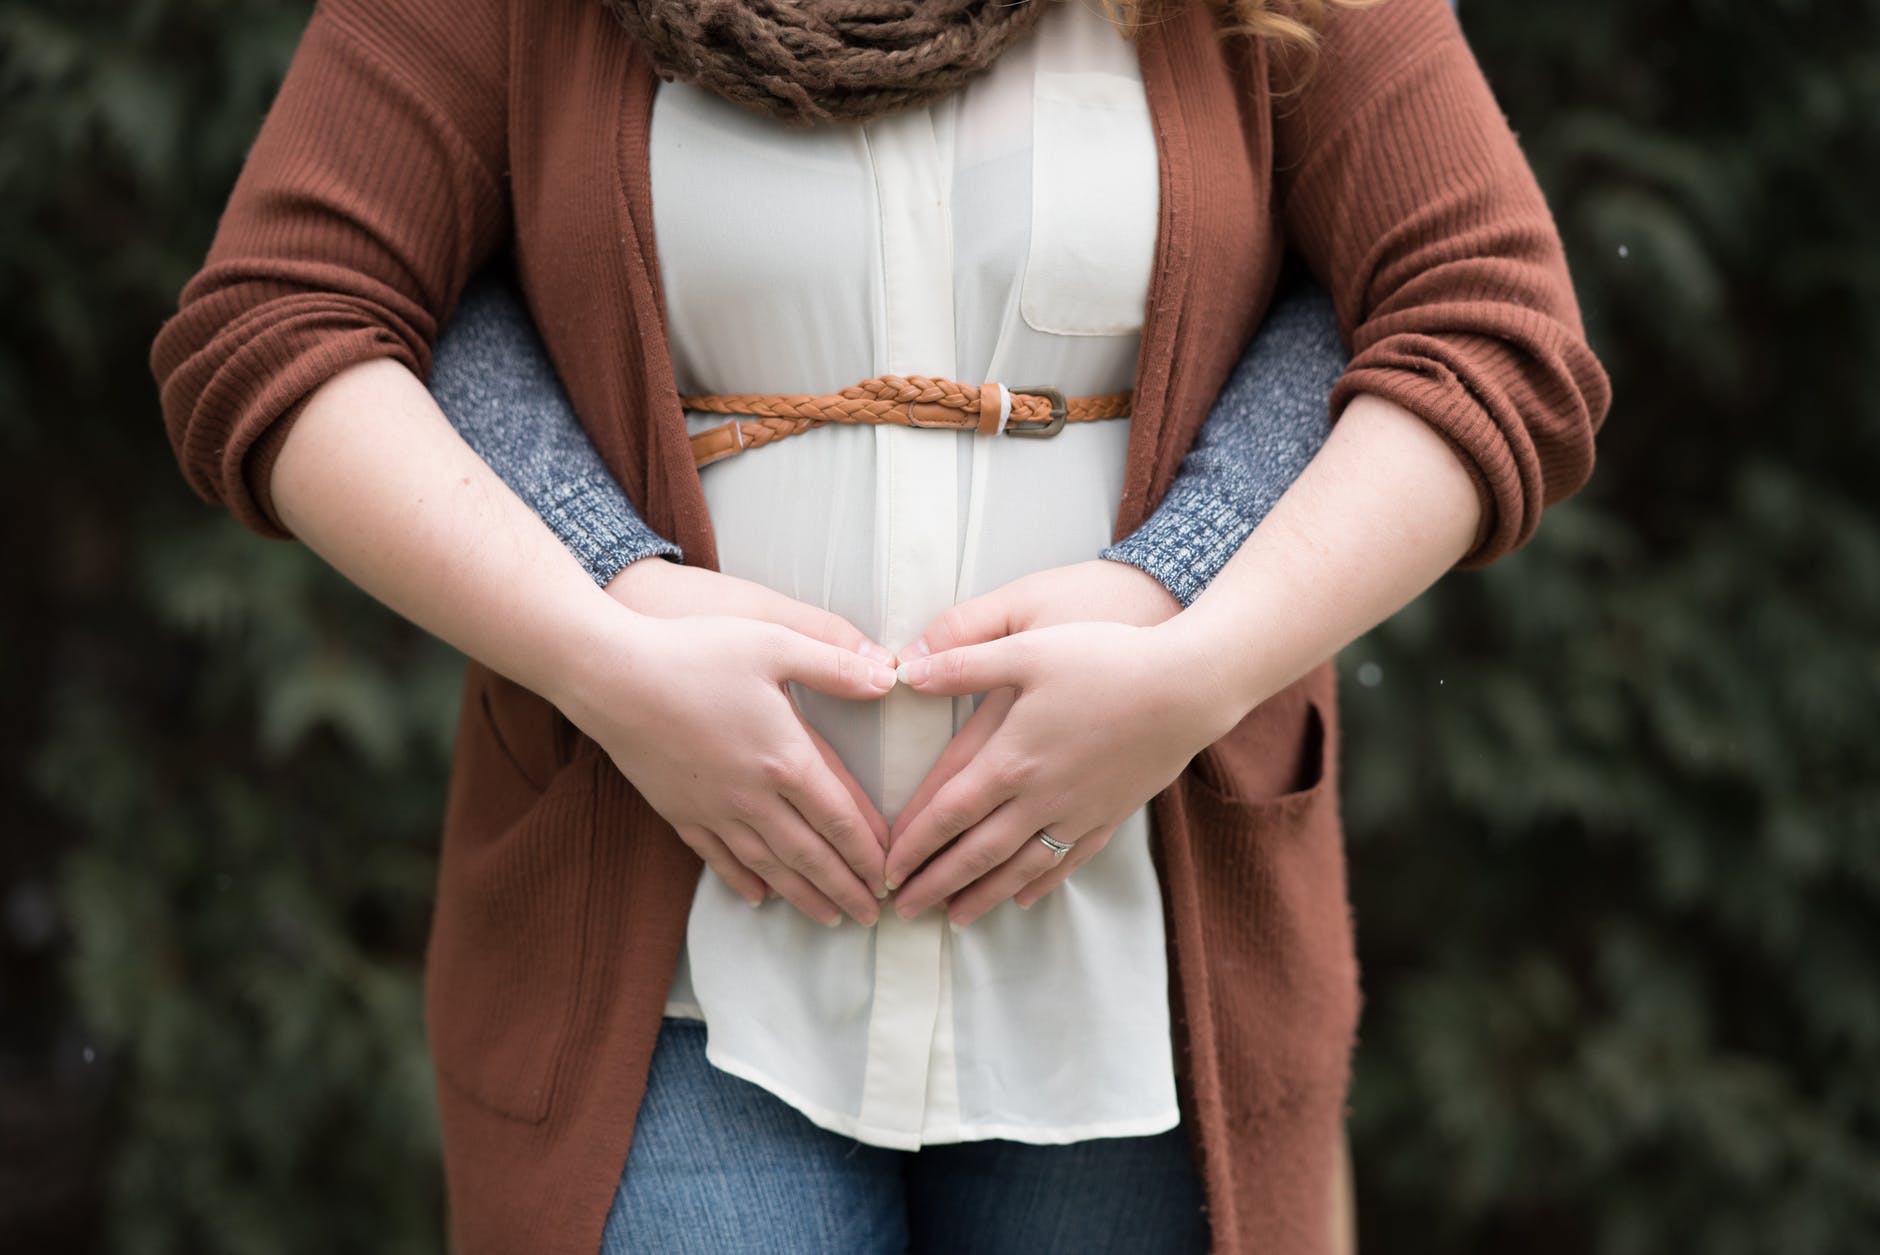 Friend Or Foe – How Pregnancy Can Reveal Your True Friends